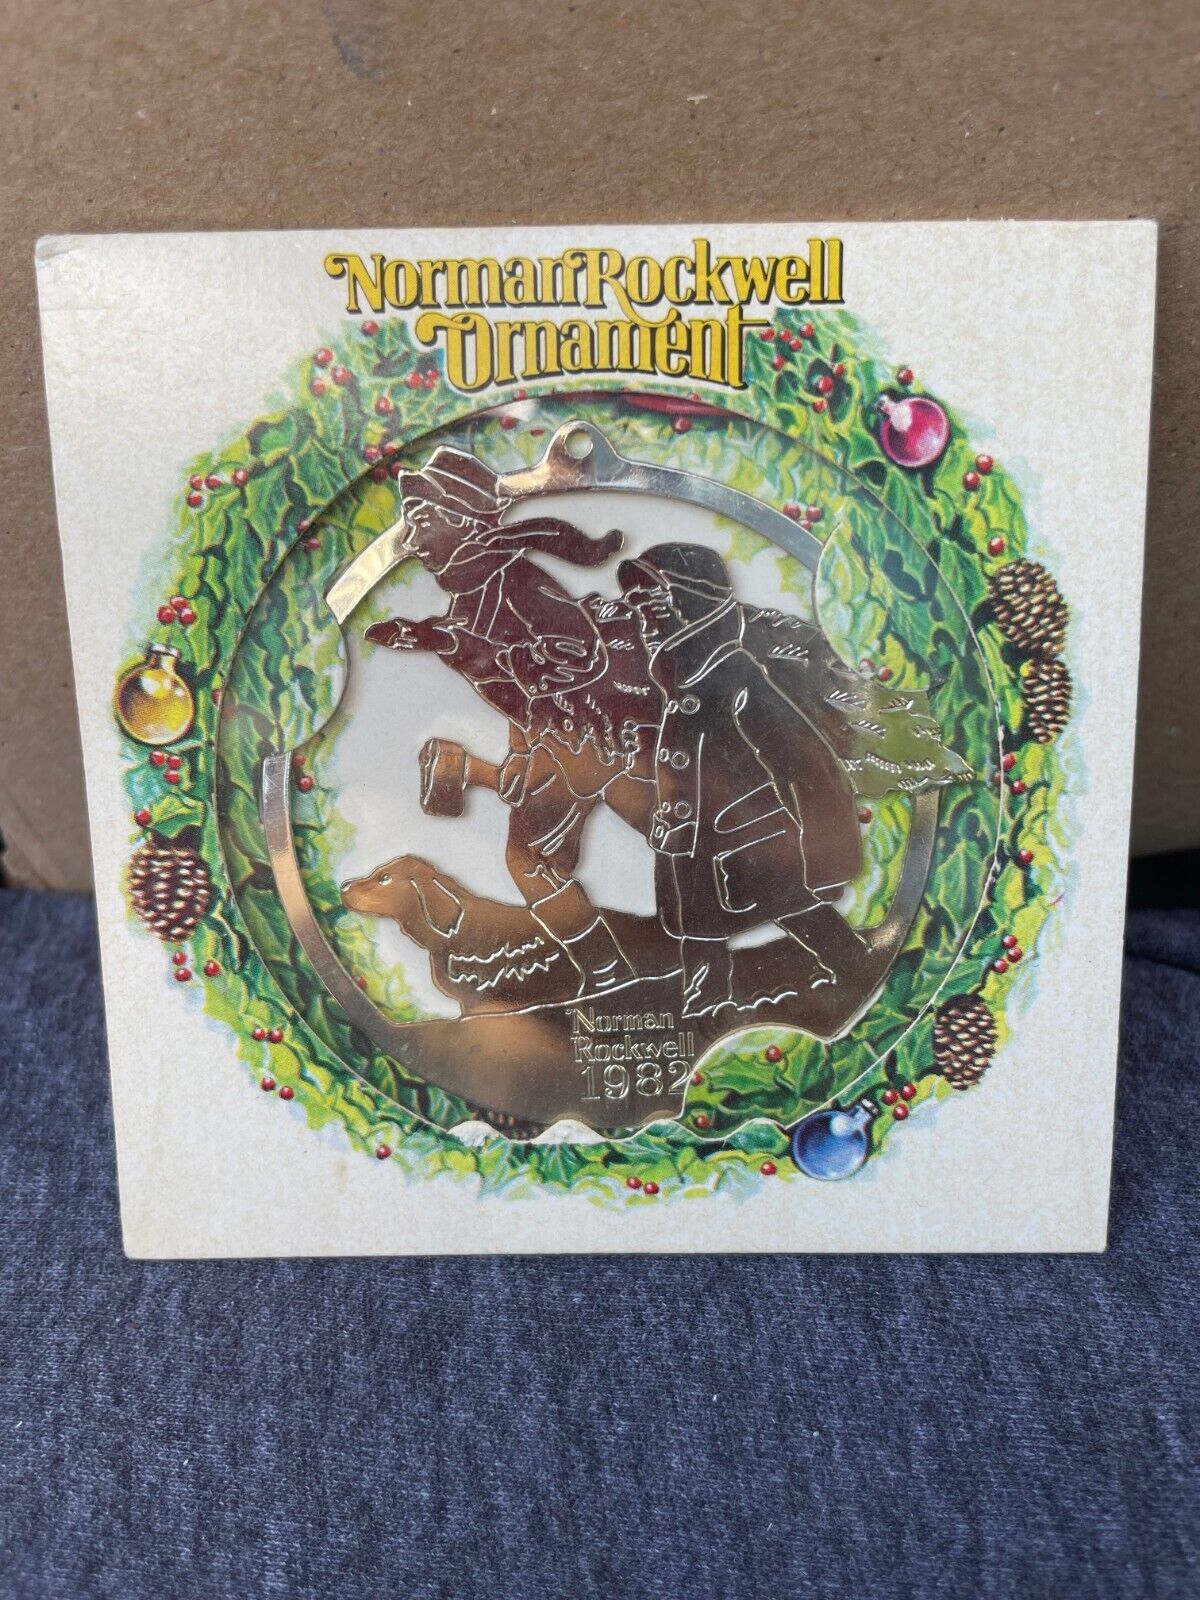 1982 Norman Rockwell Christmas Ornament